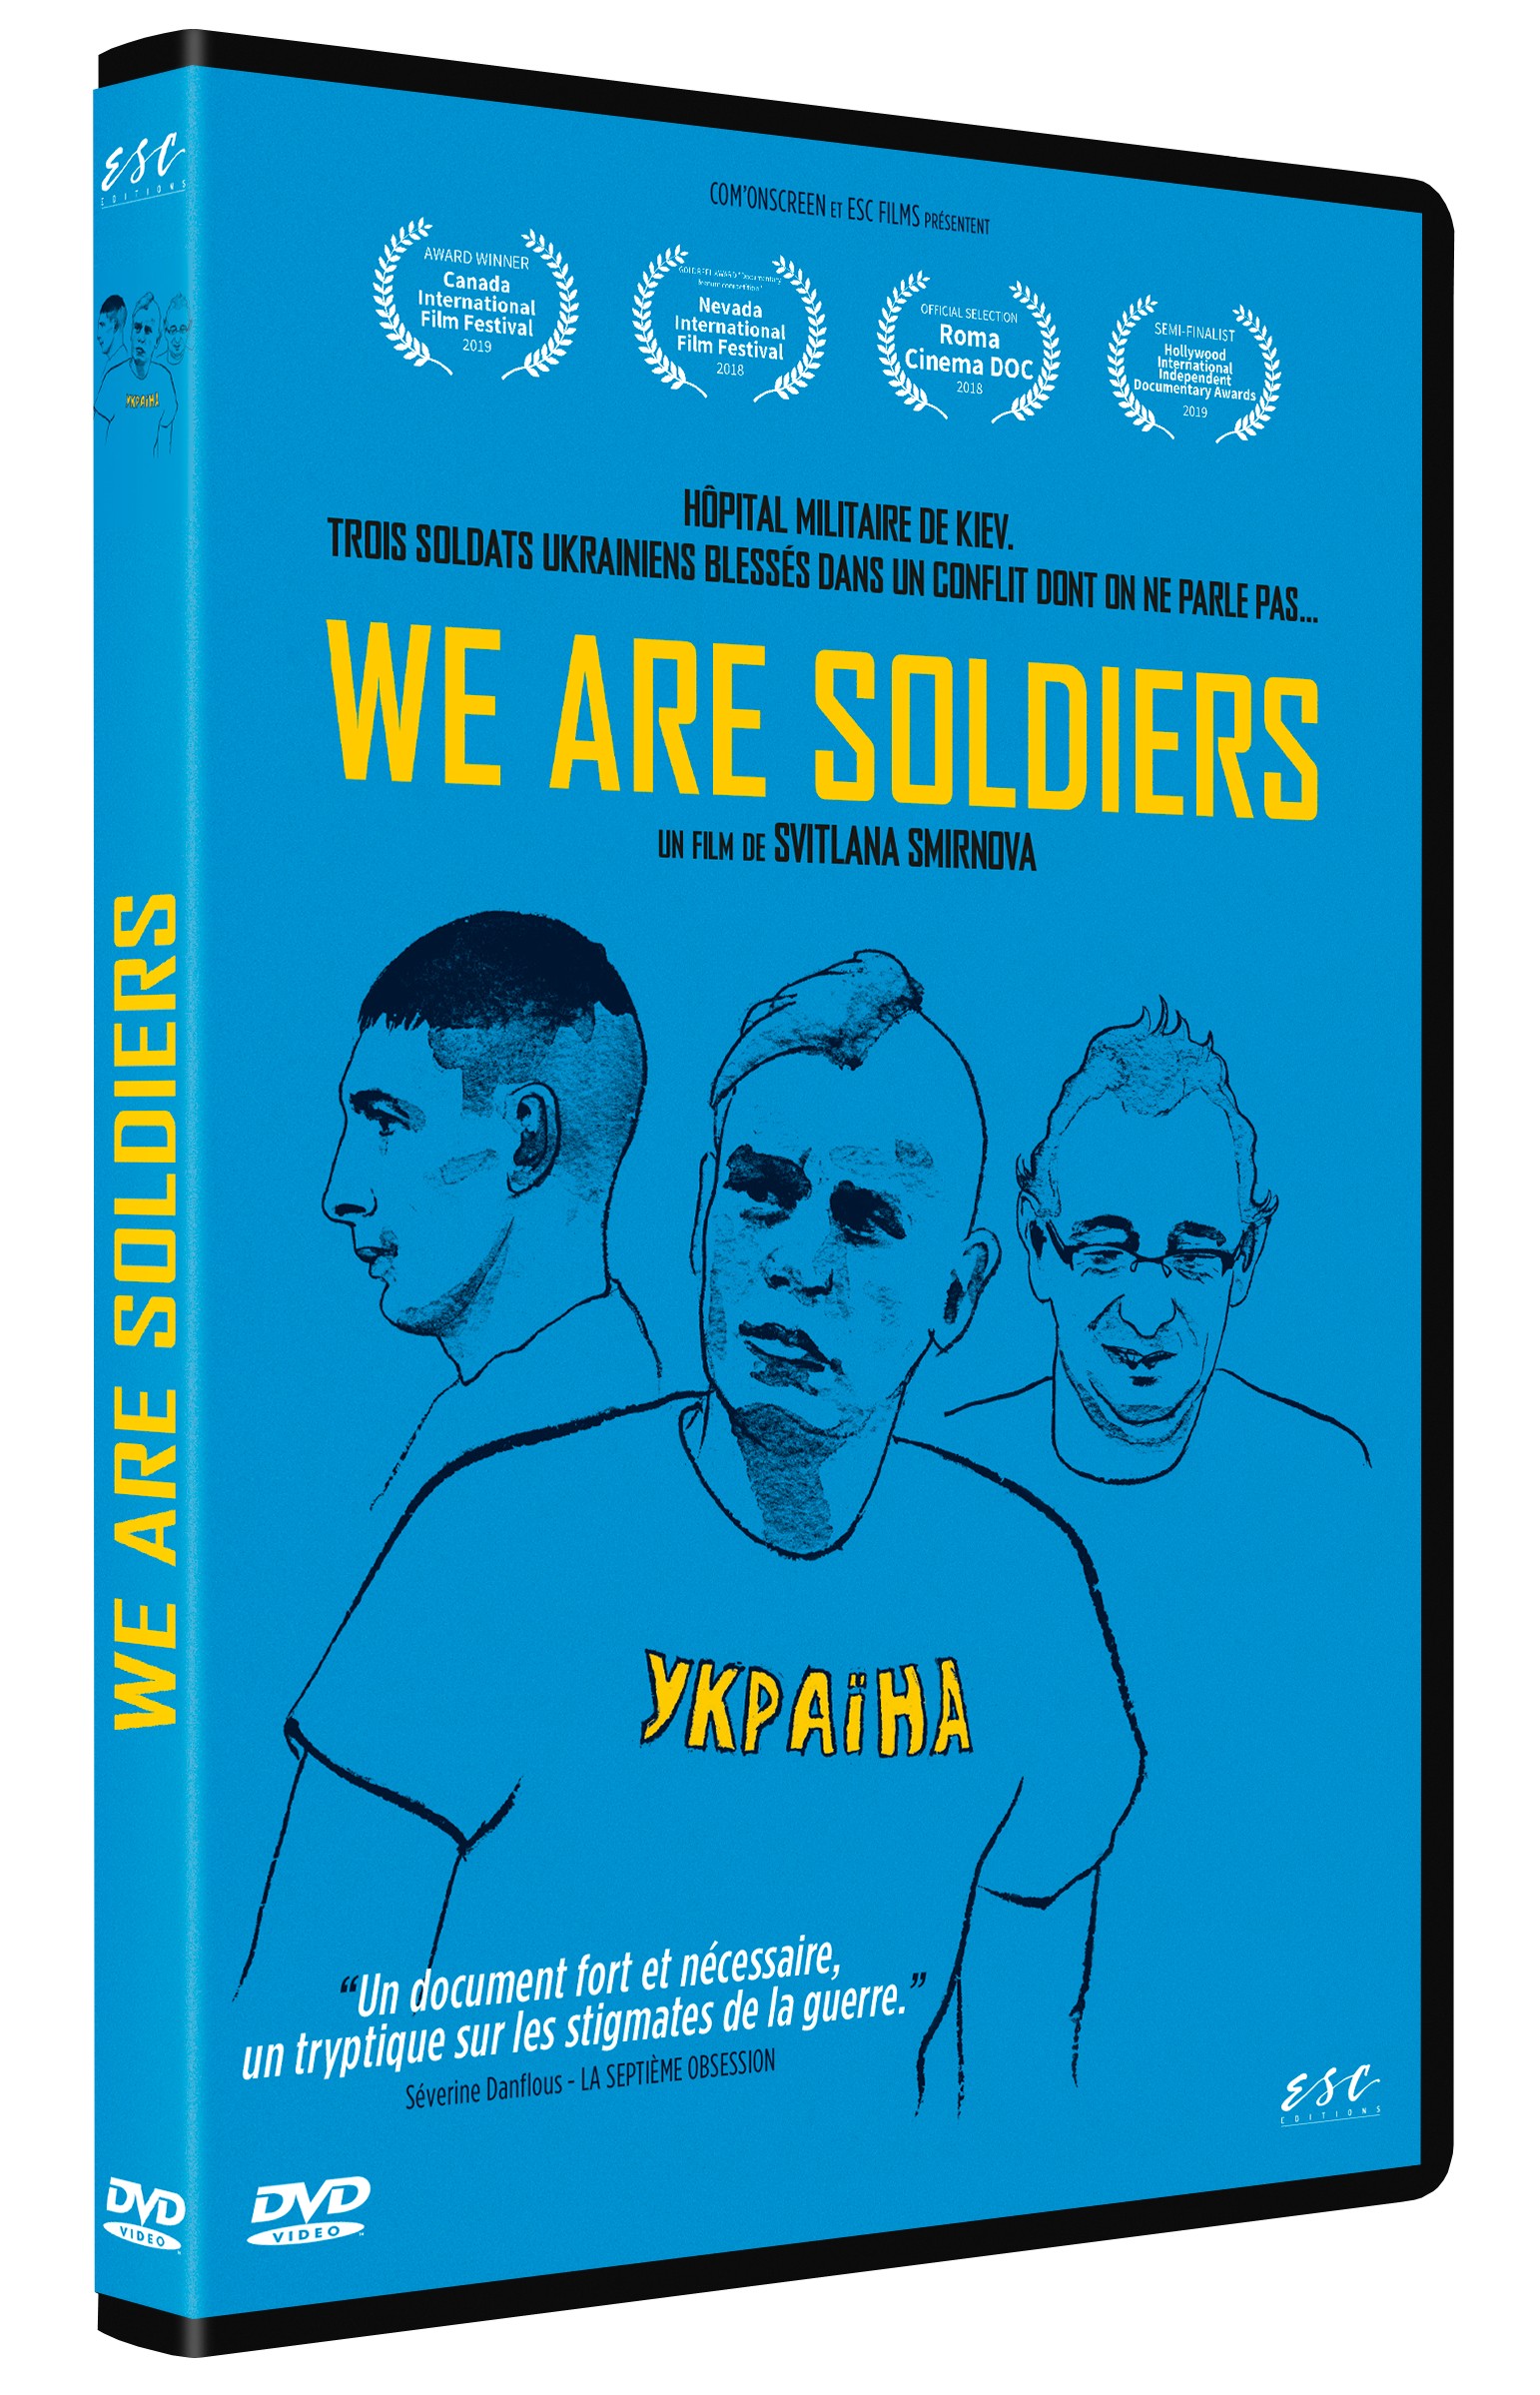 WE ARE SOLDIERS